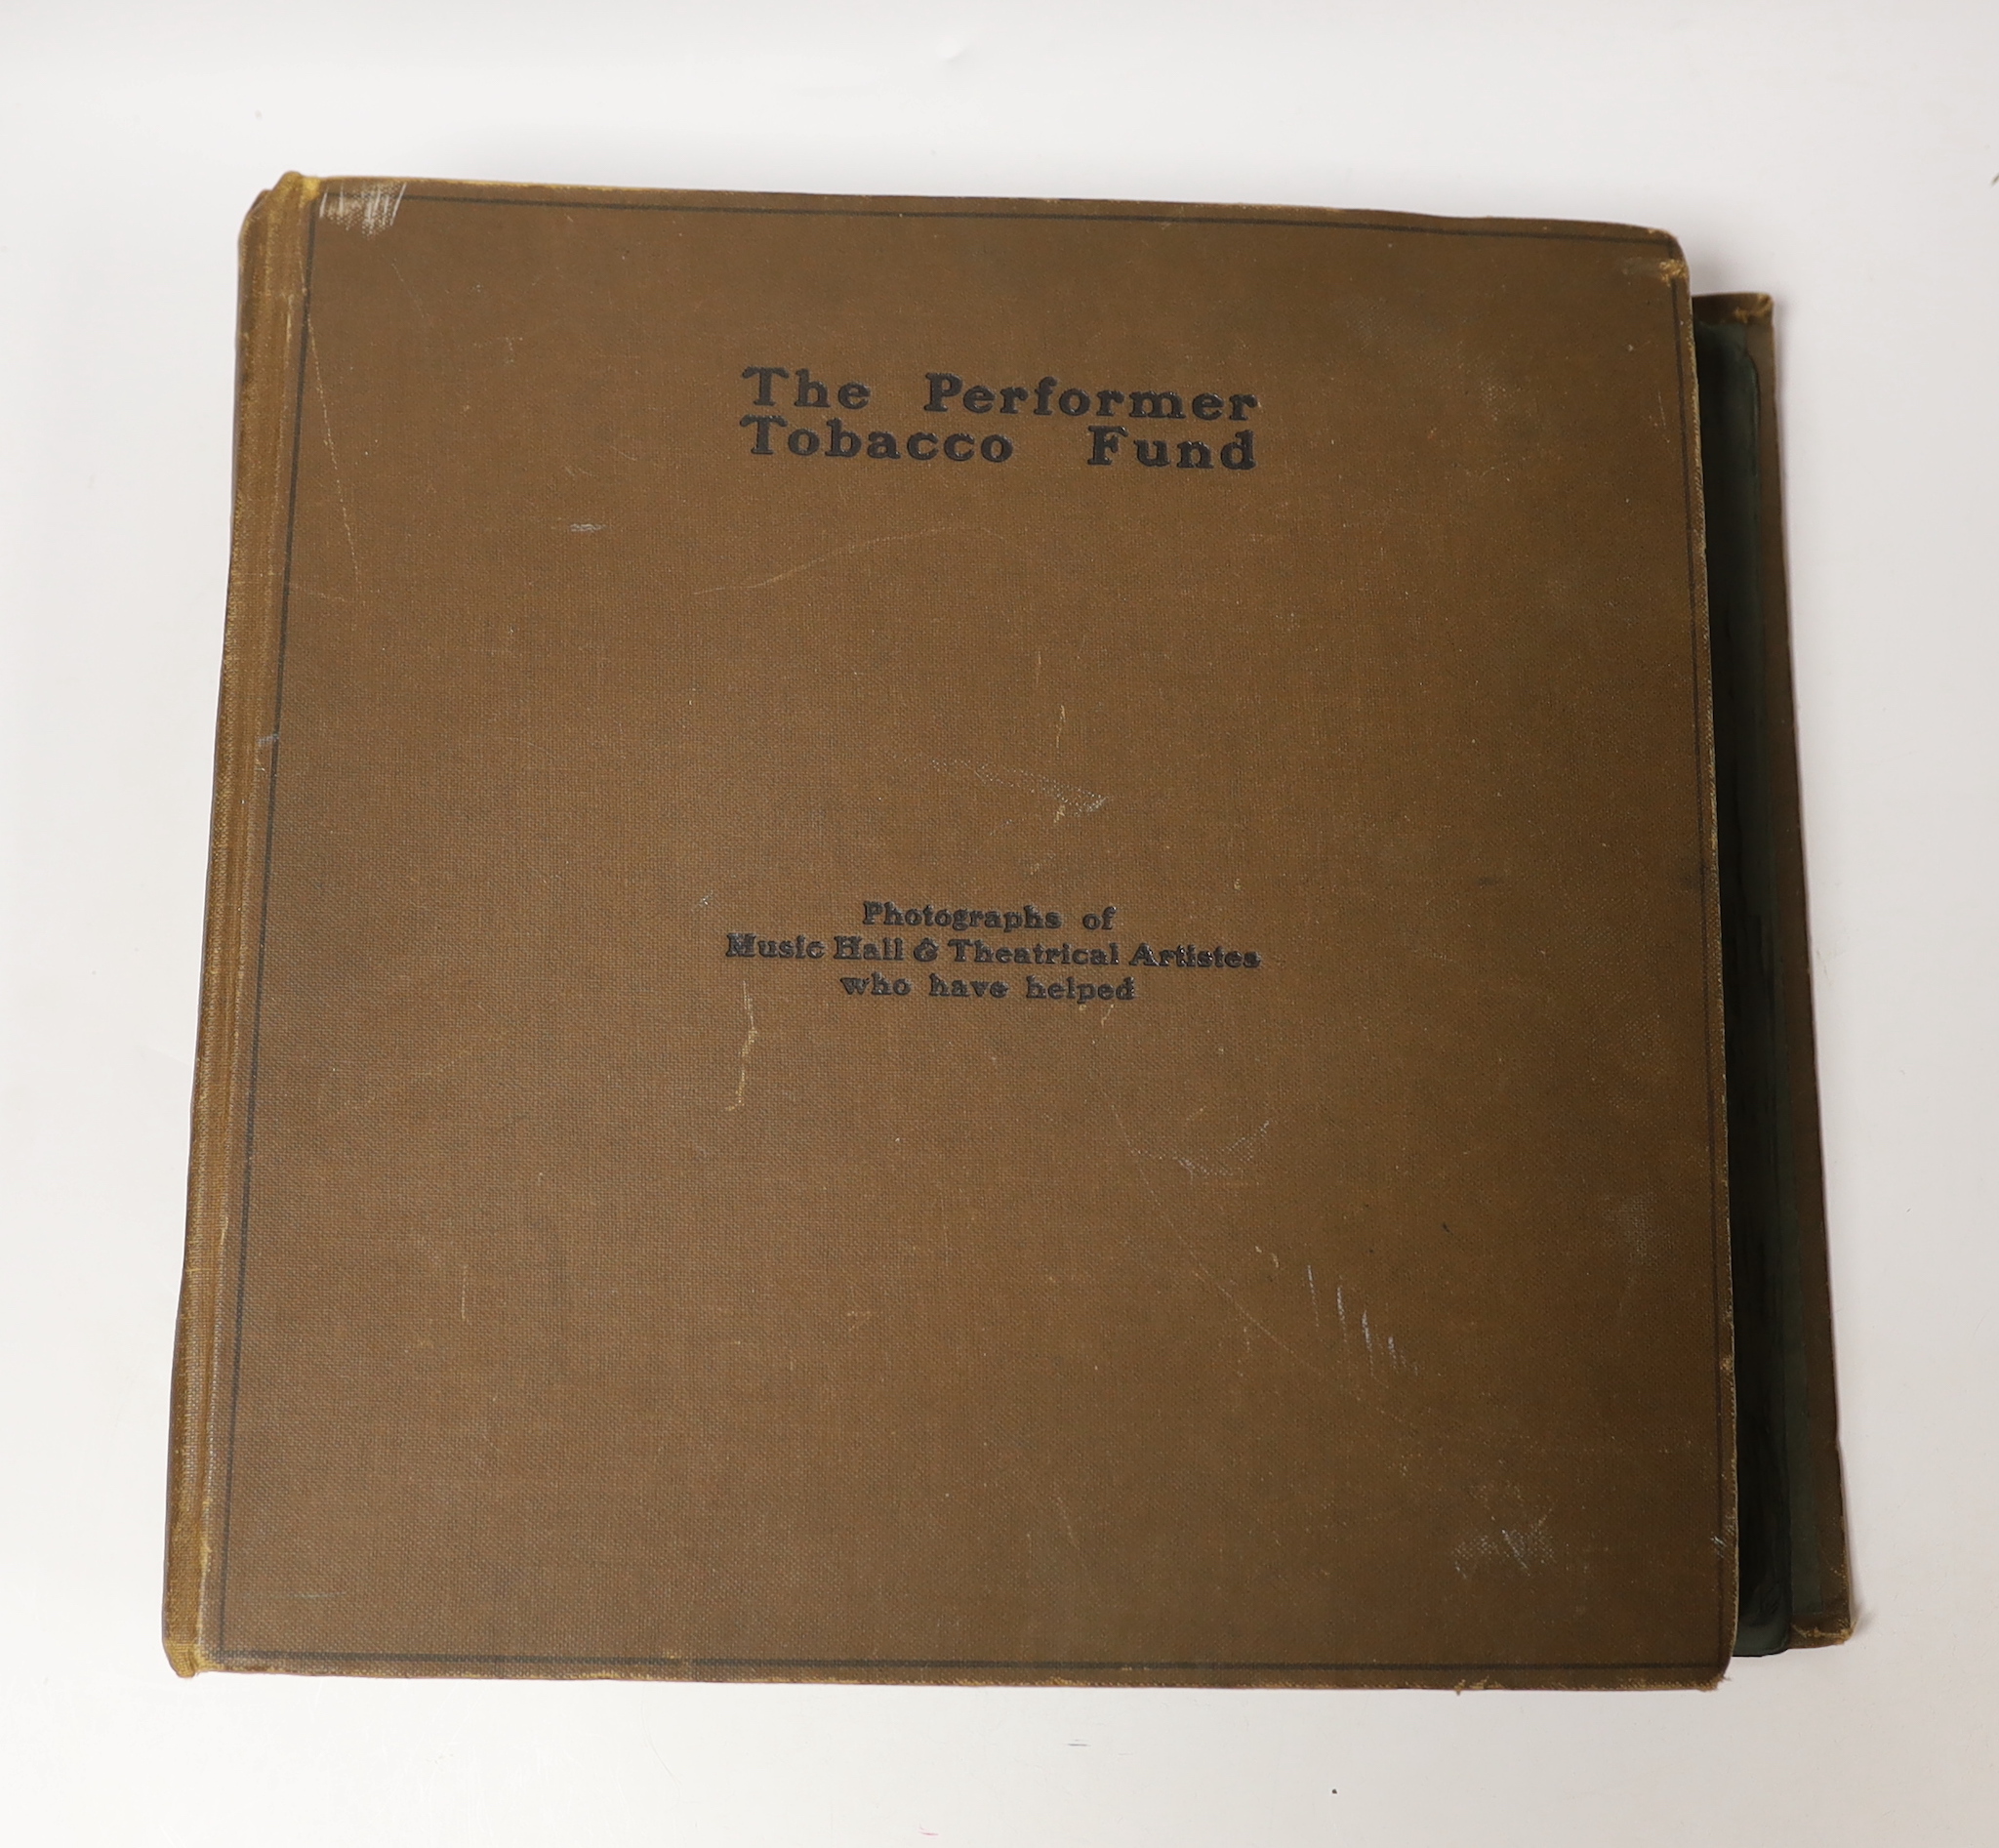 An early 20th century postcard album, The Performer Tobacco Fund containing 774 postcards from the series (out of a known total of 775)